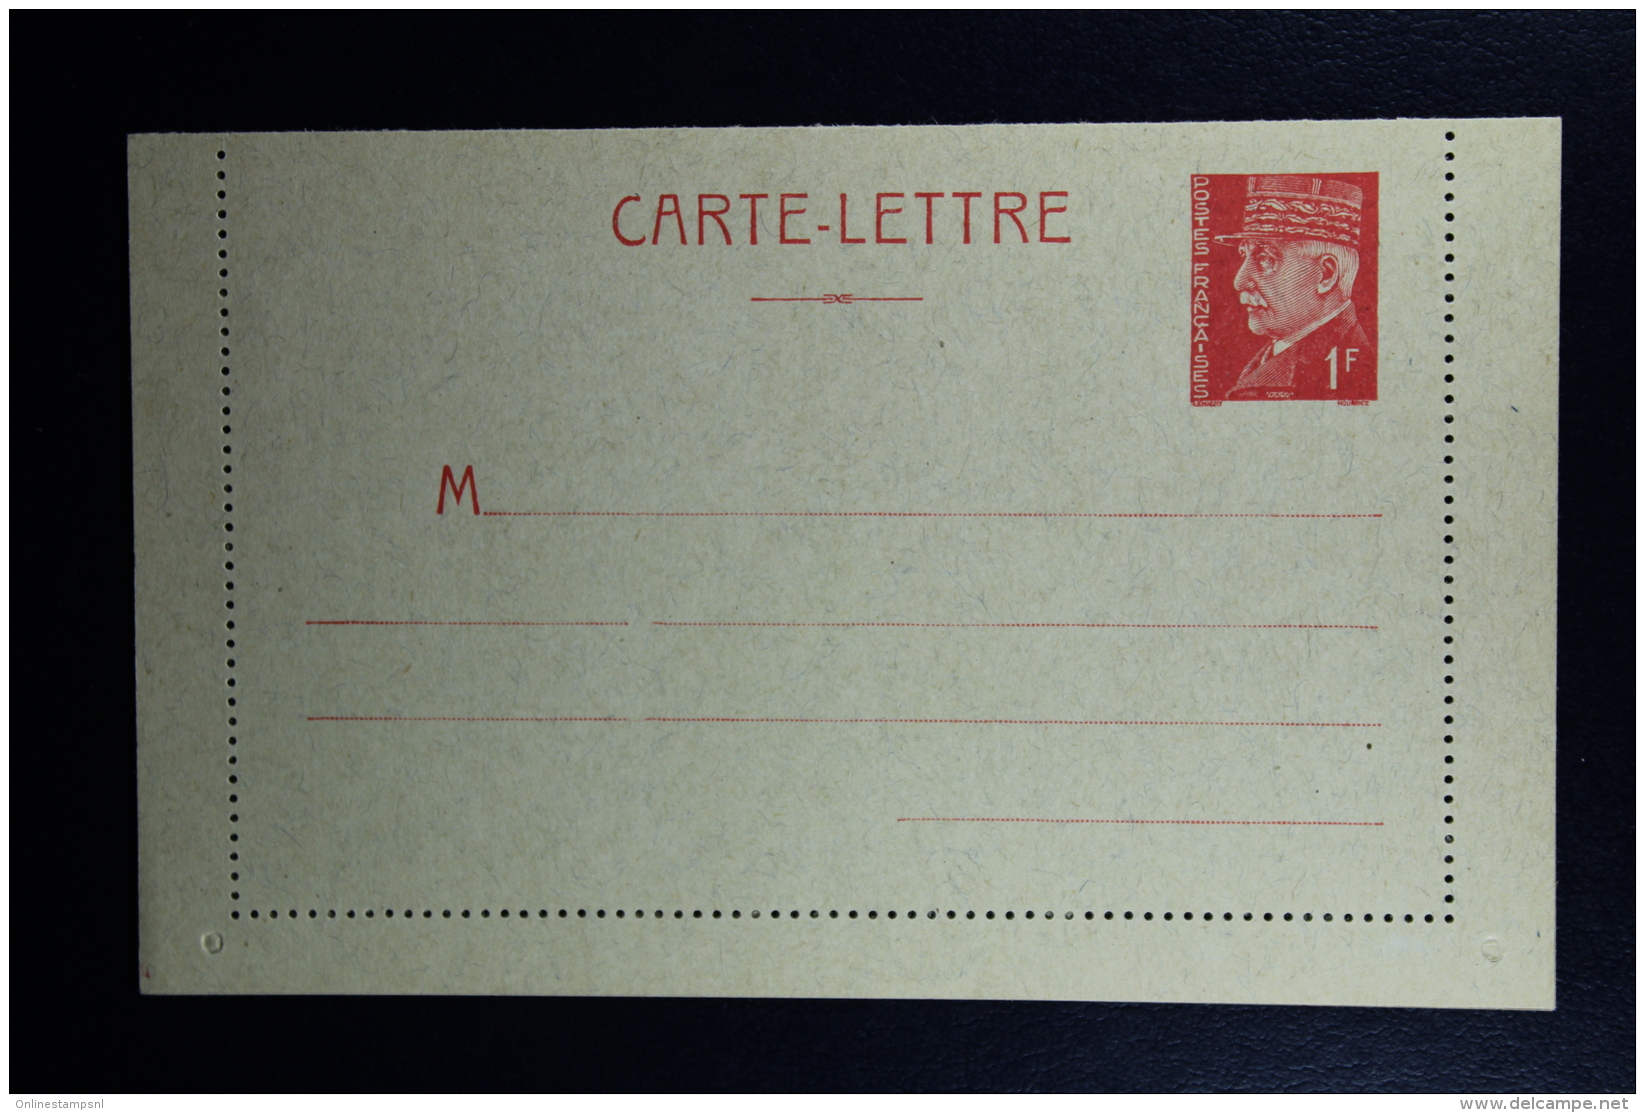 France: Carte-Lettre  Petain 1F  Type C1  Not Used - Kartenbriefe